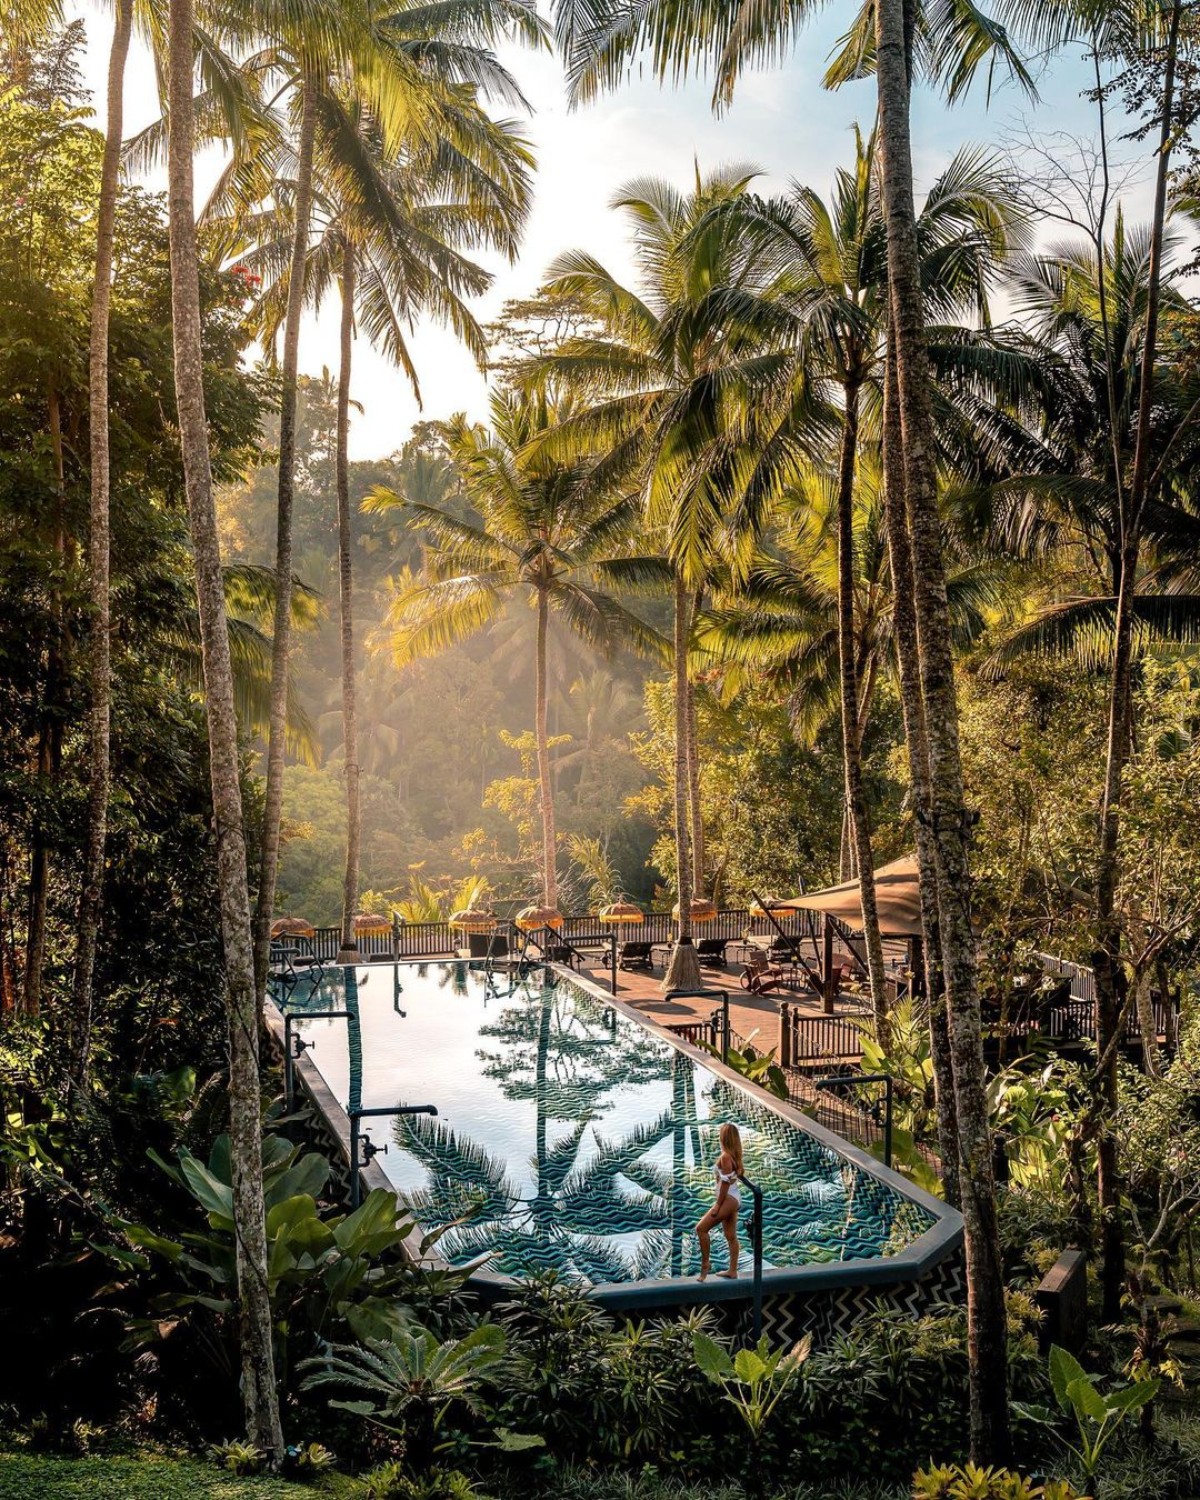 An infinity pool overlooks a lush forest, with tall palm trees and a person soaking in the sun's glow in Ubud, Bali.